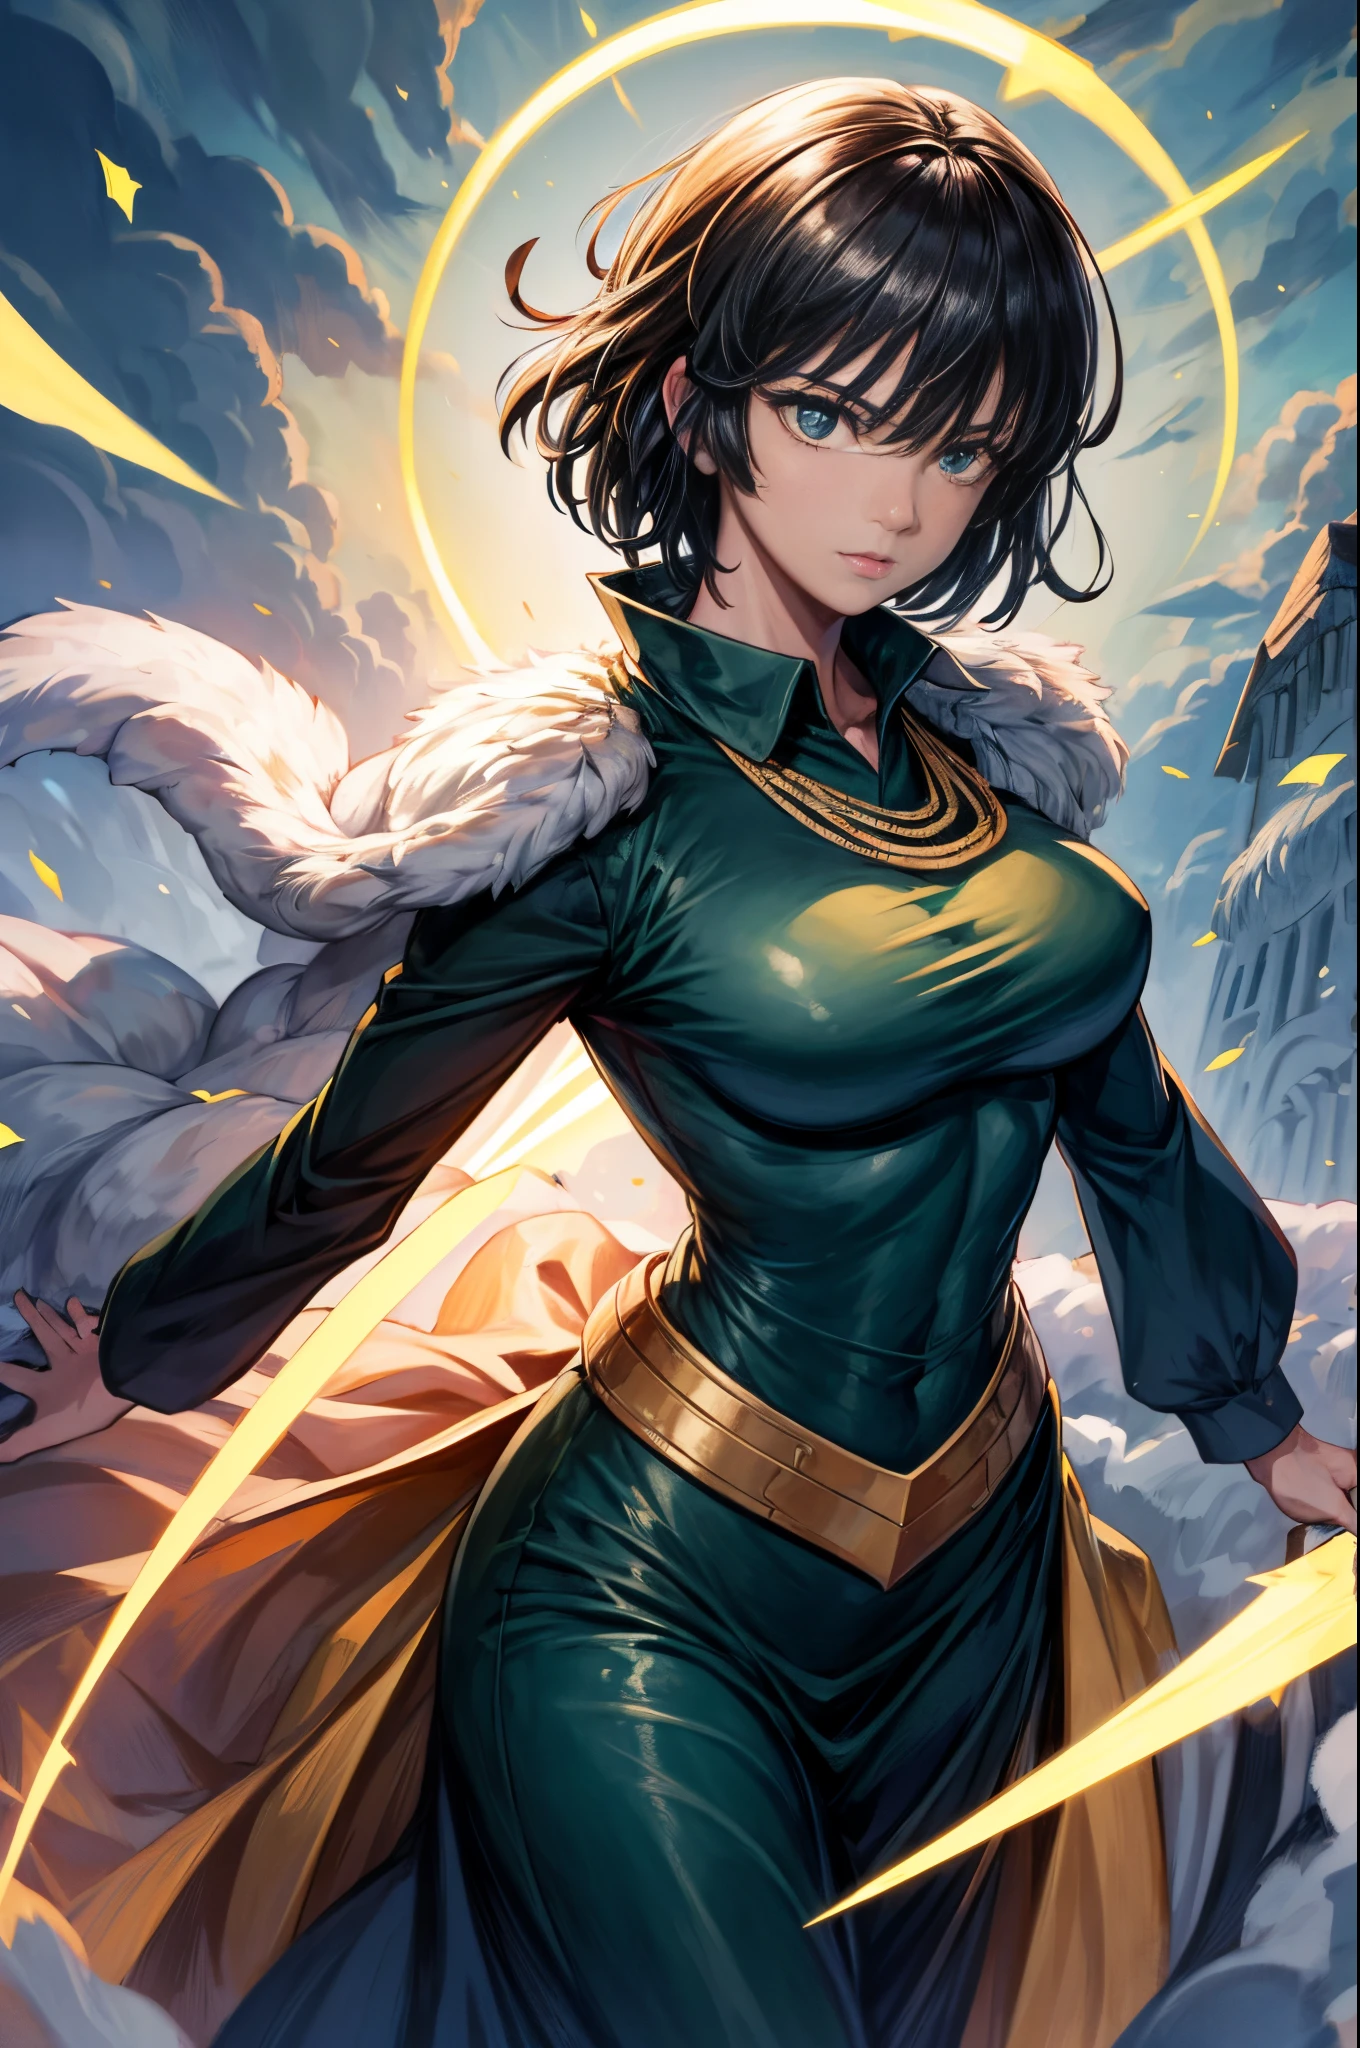 Fubuki, chest up, Golden light armor all over his body, Looking up from the camera, Walking through the medieval streets.